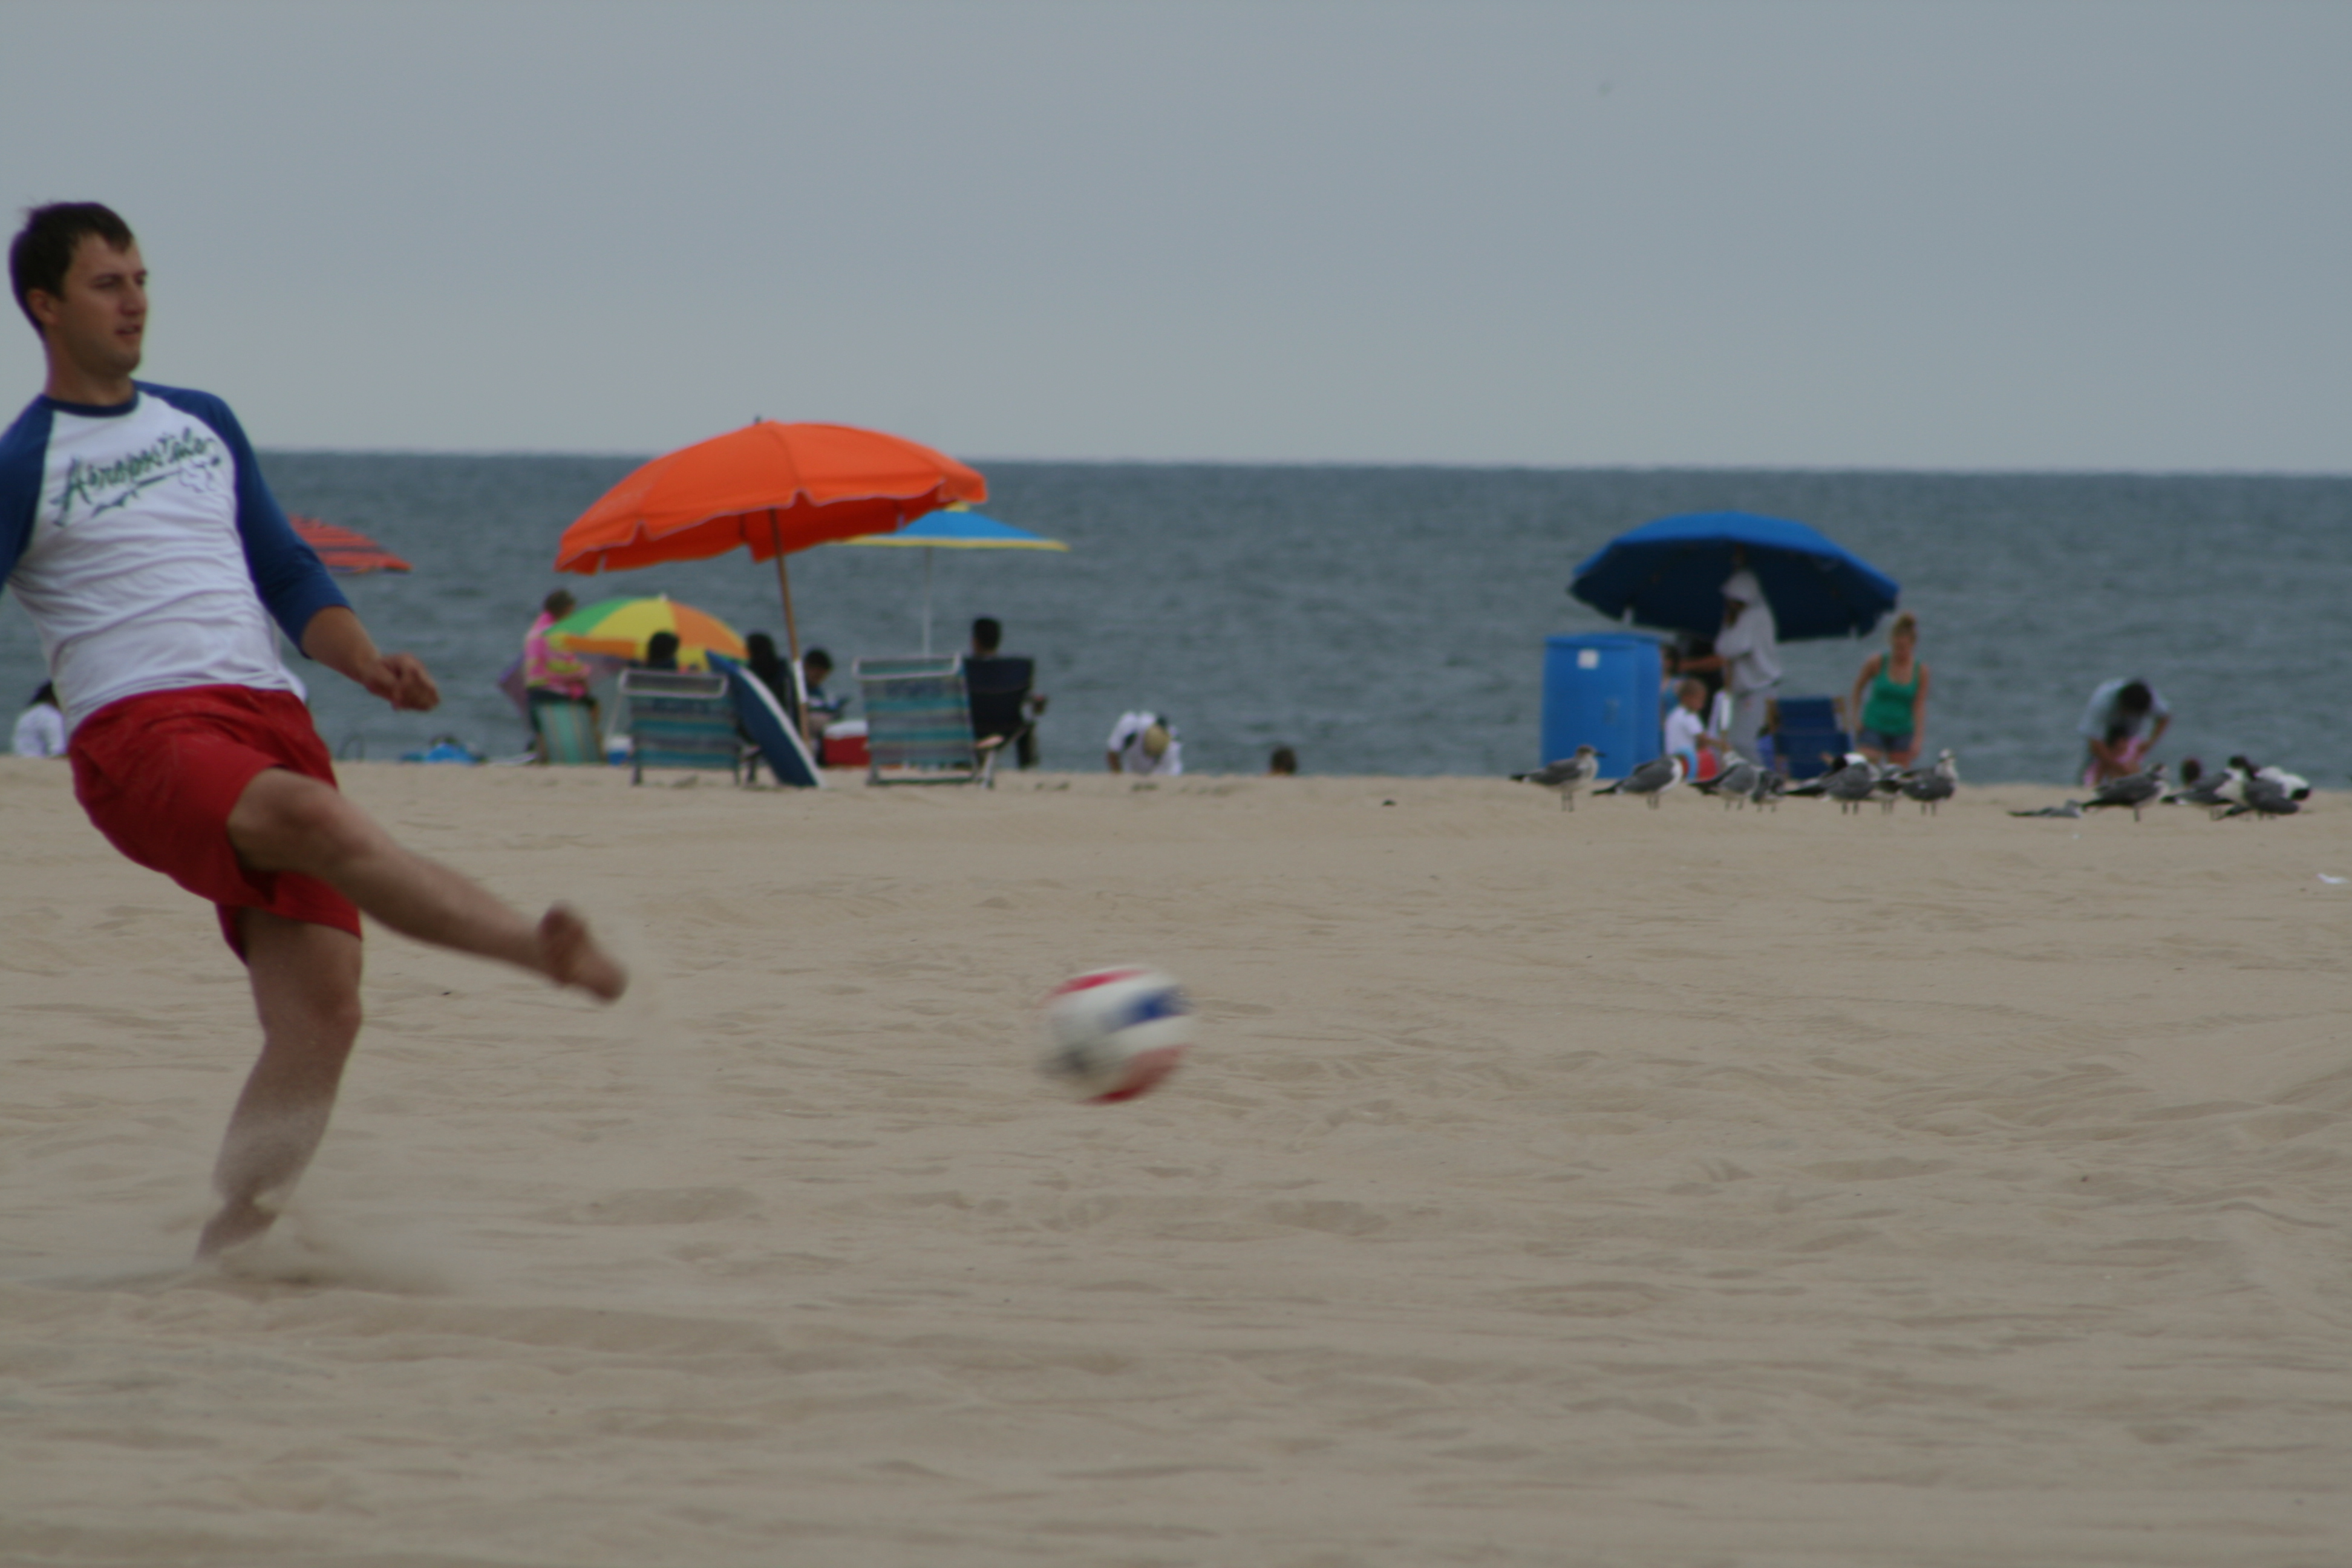 Soccer Player, Action, Ball, Beach, Fast, HQ Photo